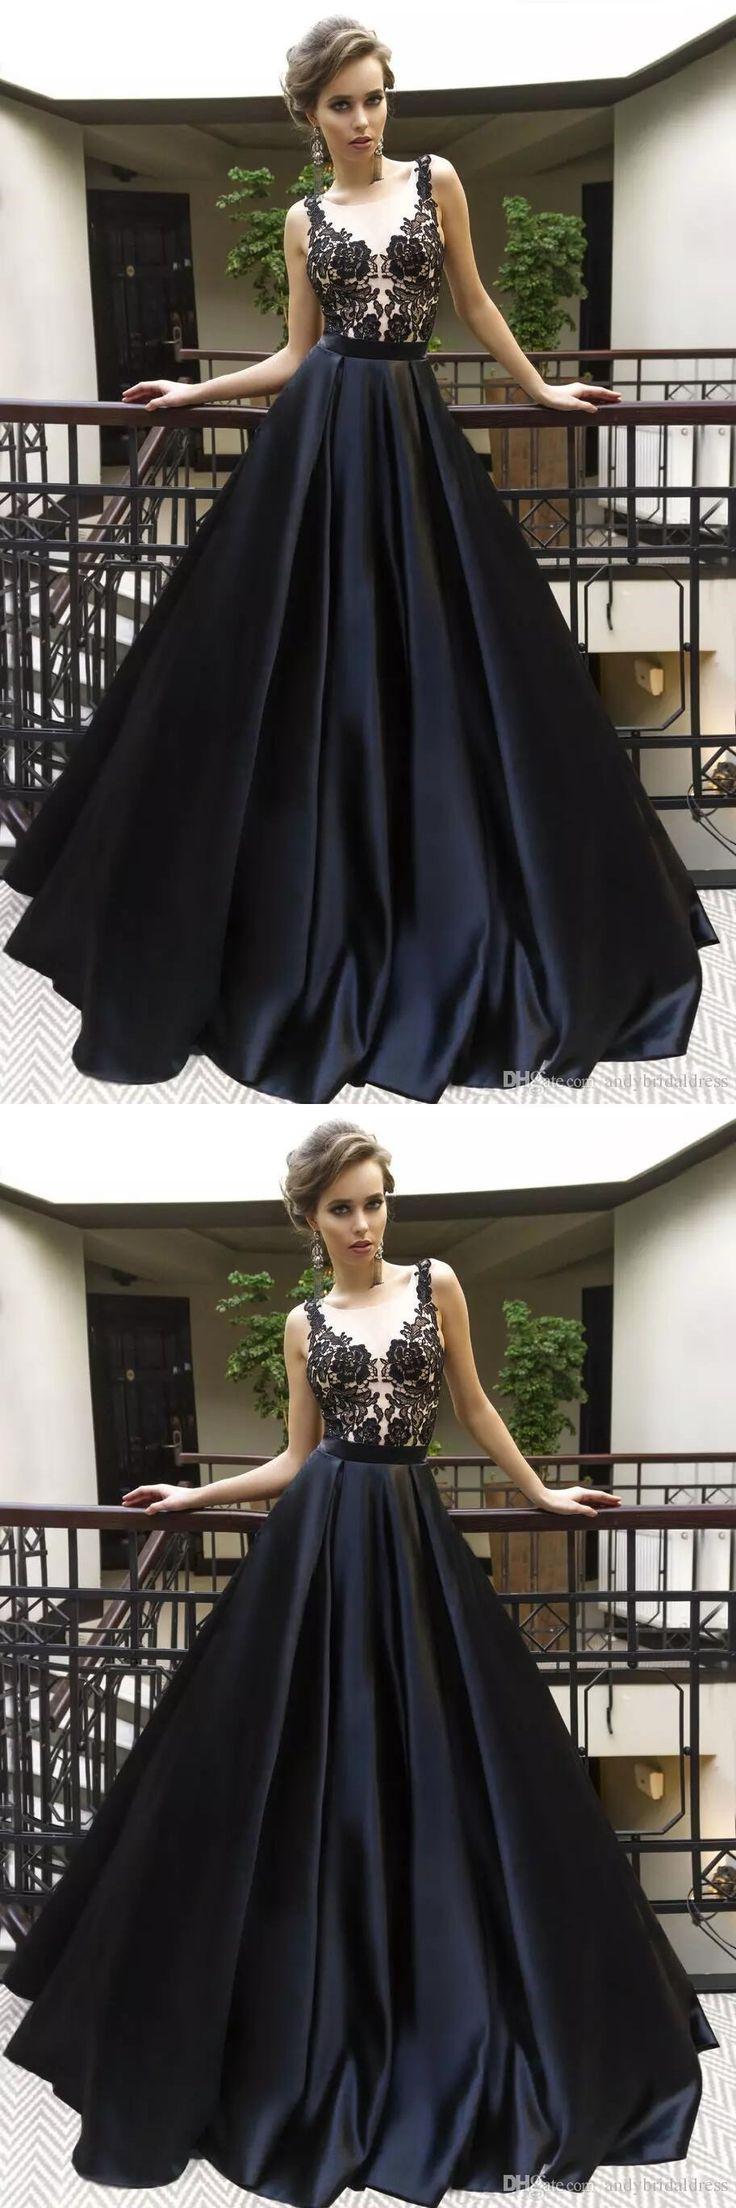 Wedding - Black Prom Dress 2018,Prom Dresses,Evening Gown, Graduation Party Dresses, Prom Dresses For Teens G361 From MeetBeauty